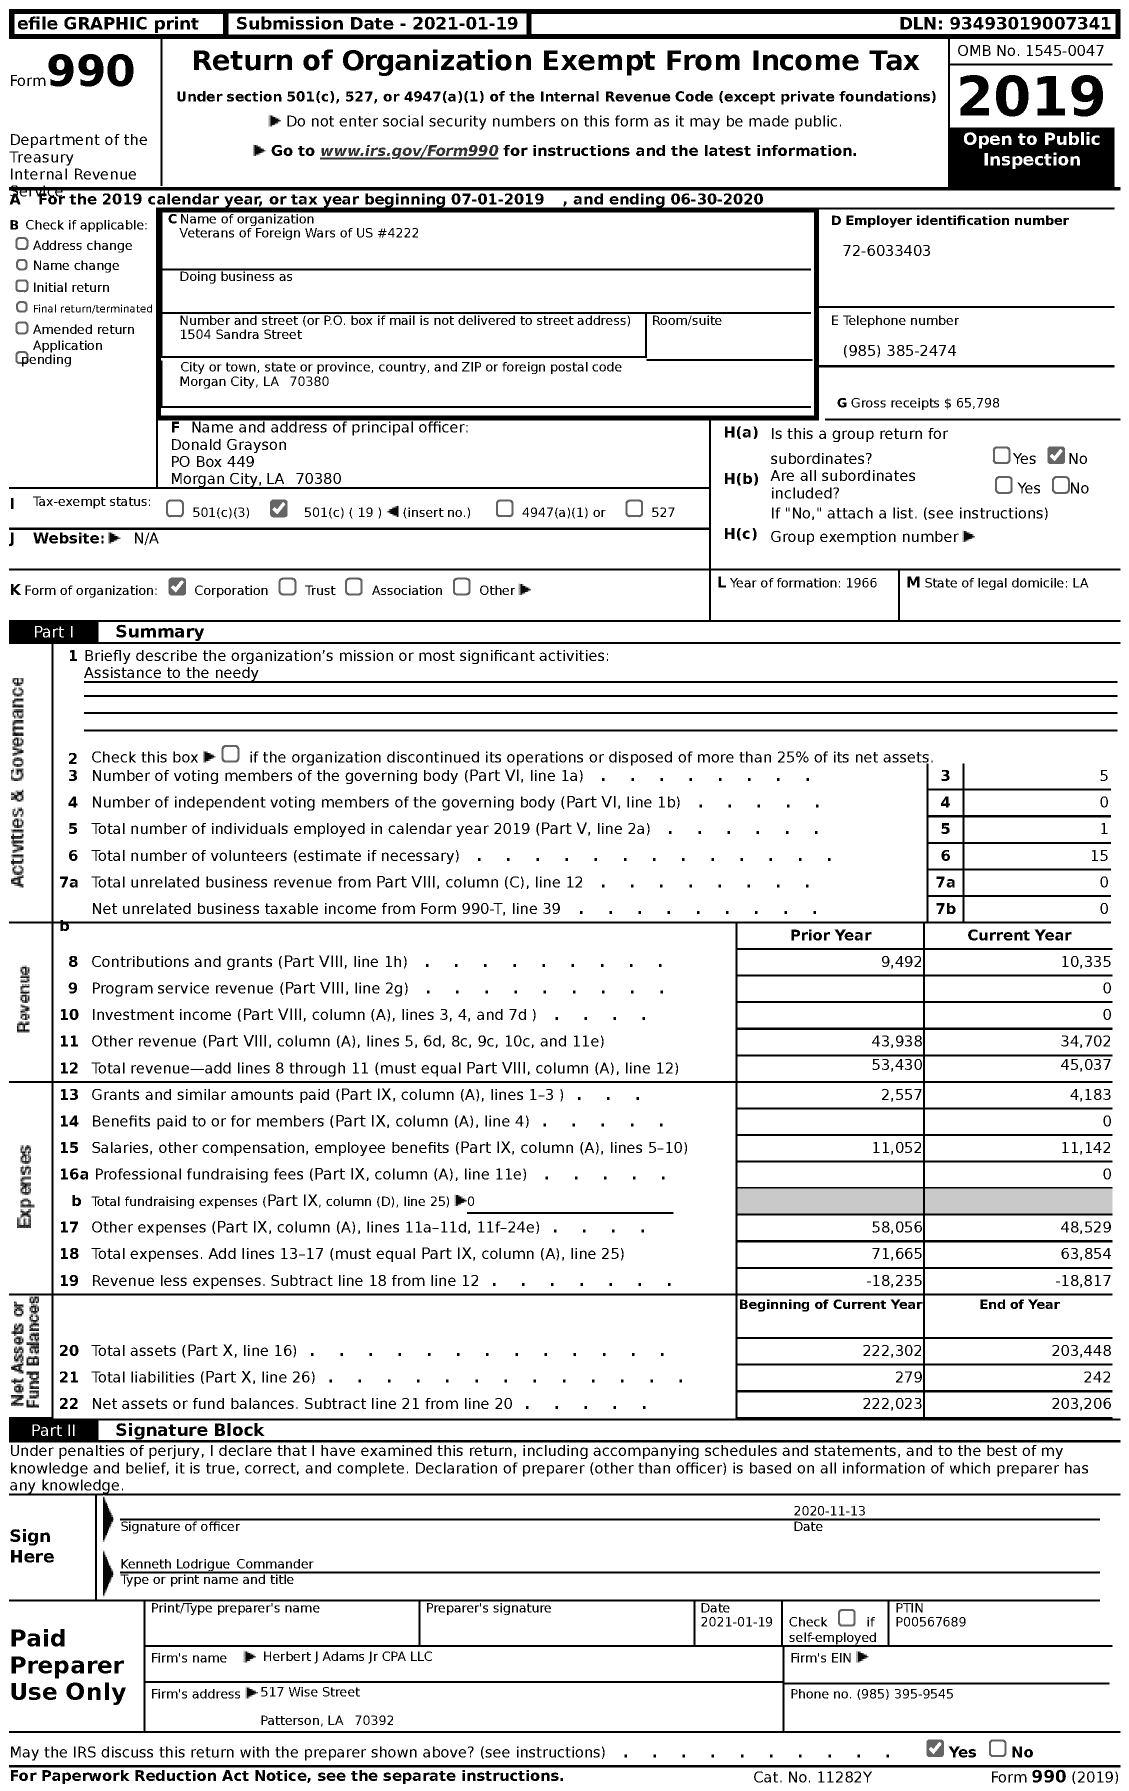 Image of first page of 2019 Form 990 for Veterans of Foreign Wars of the United States Dept of Louisiana - 4222 Oil Center